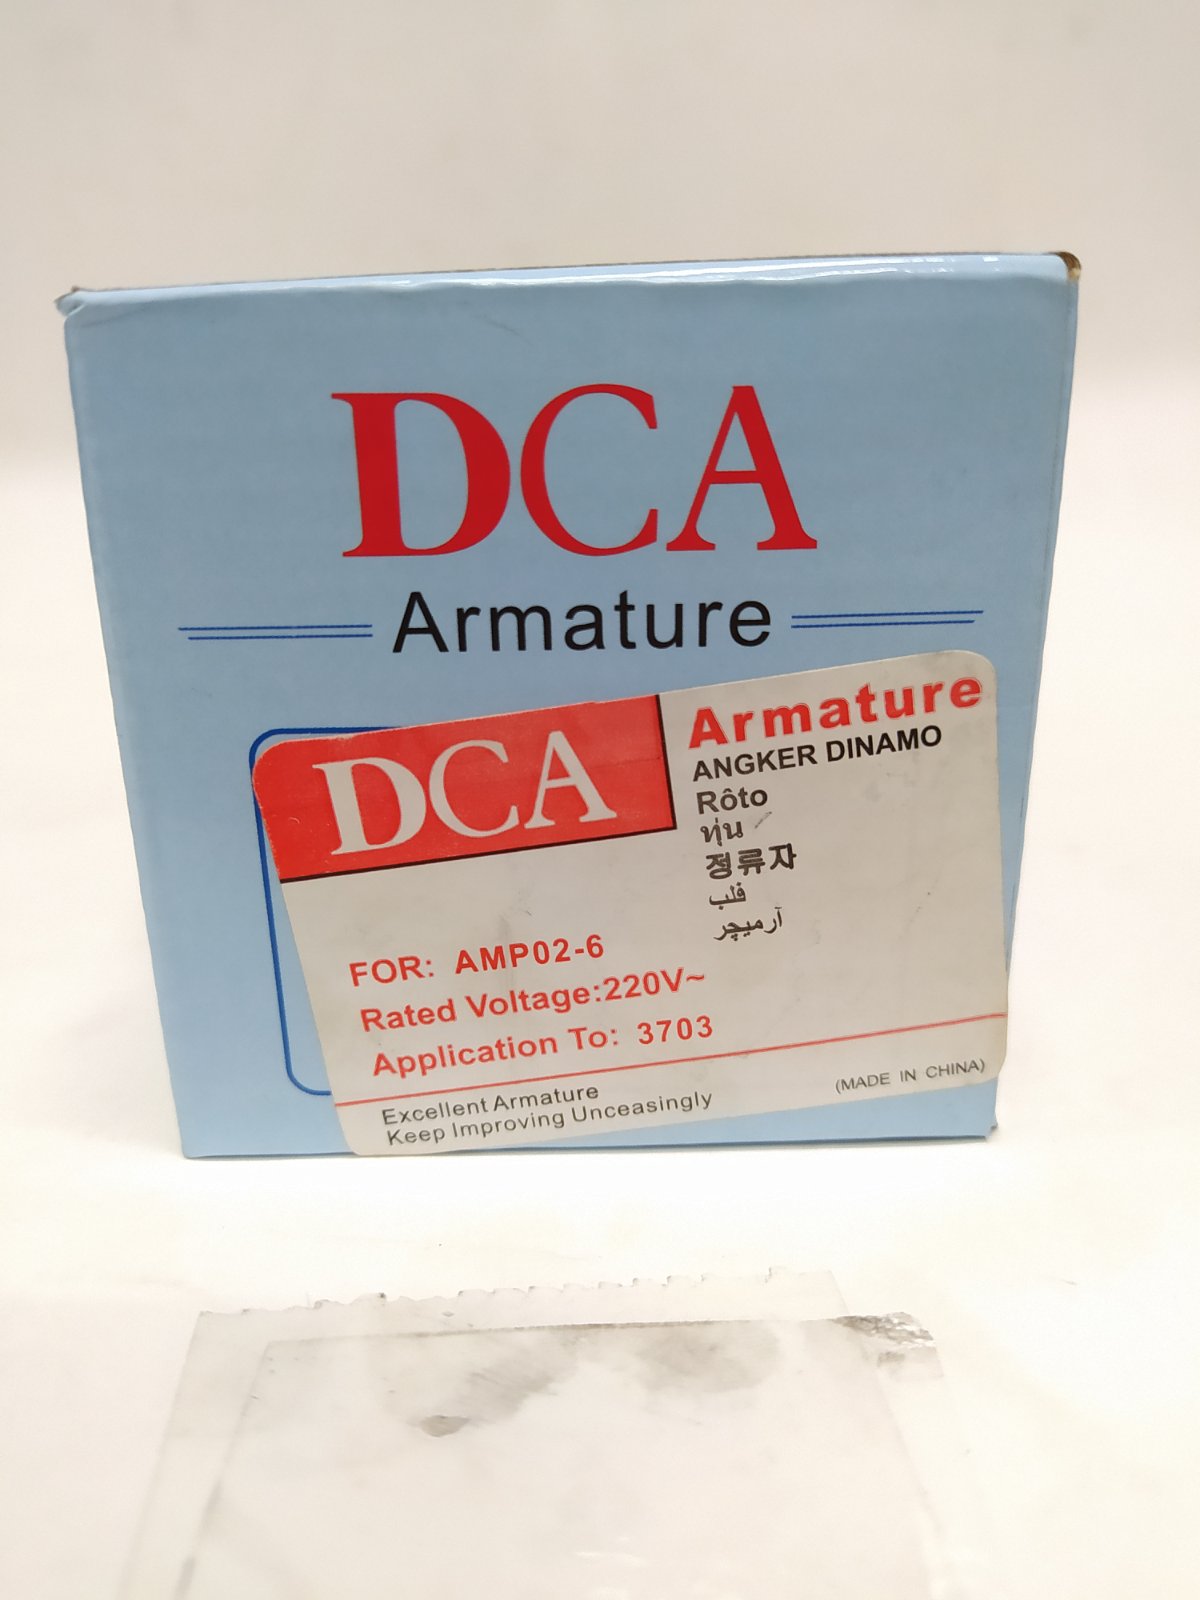 DCA Armature for AMP02-6 Trimmer 350W